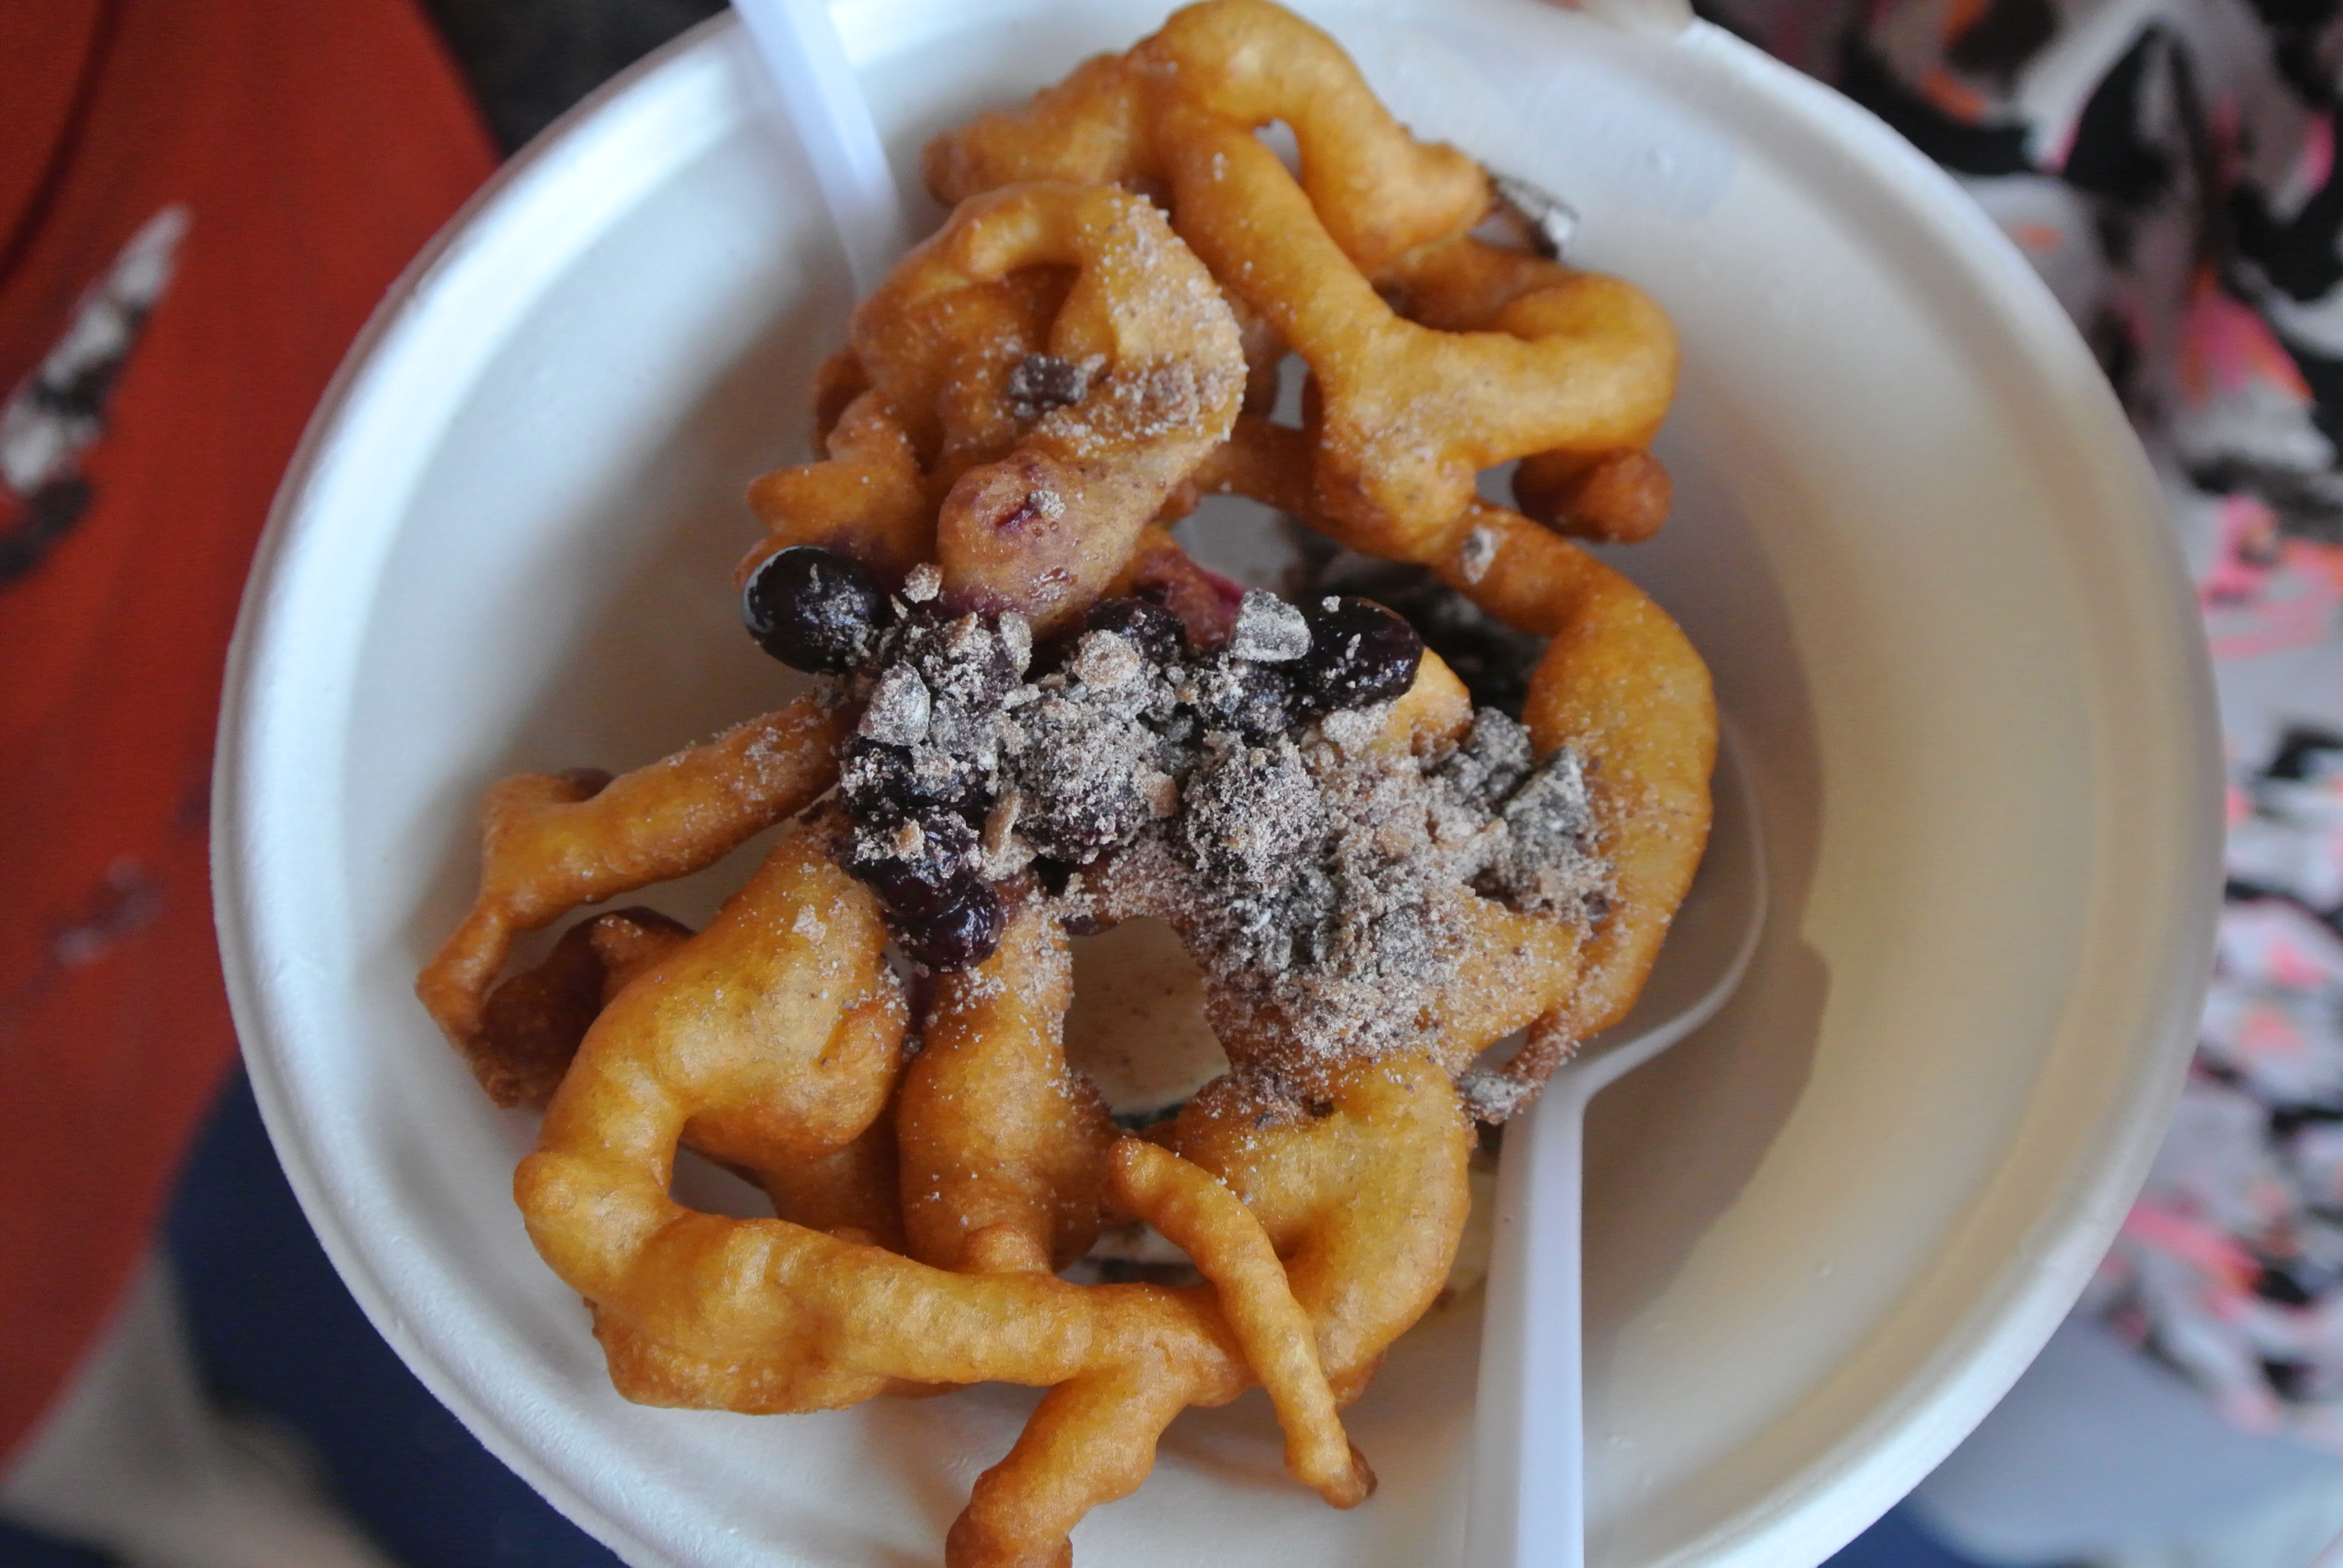 Richmond Station's funnel cake with vanilla ice cream and stewed fruit.